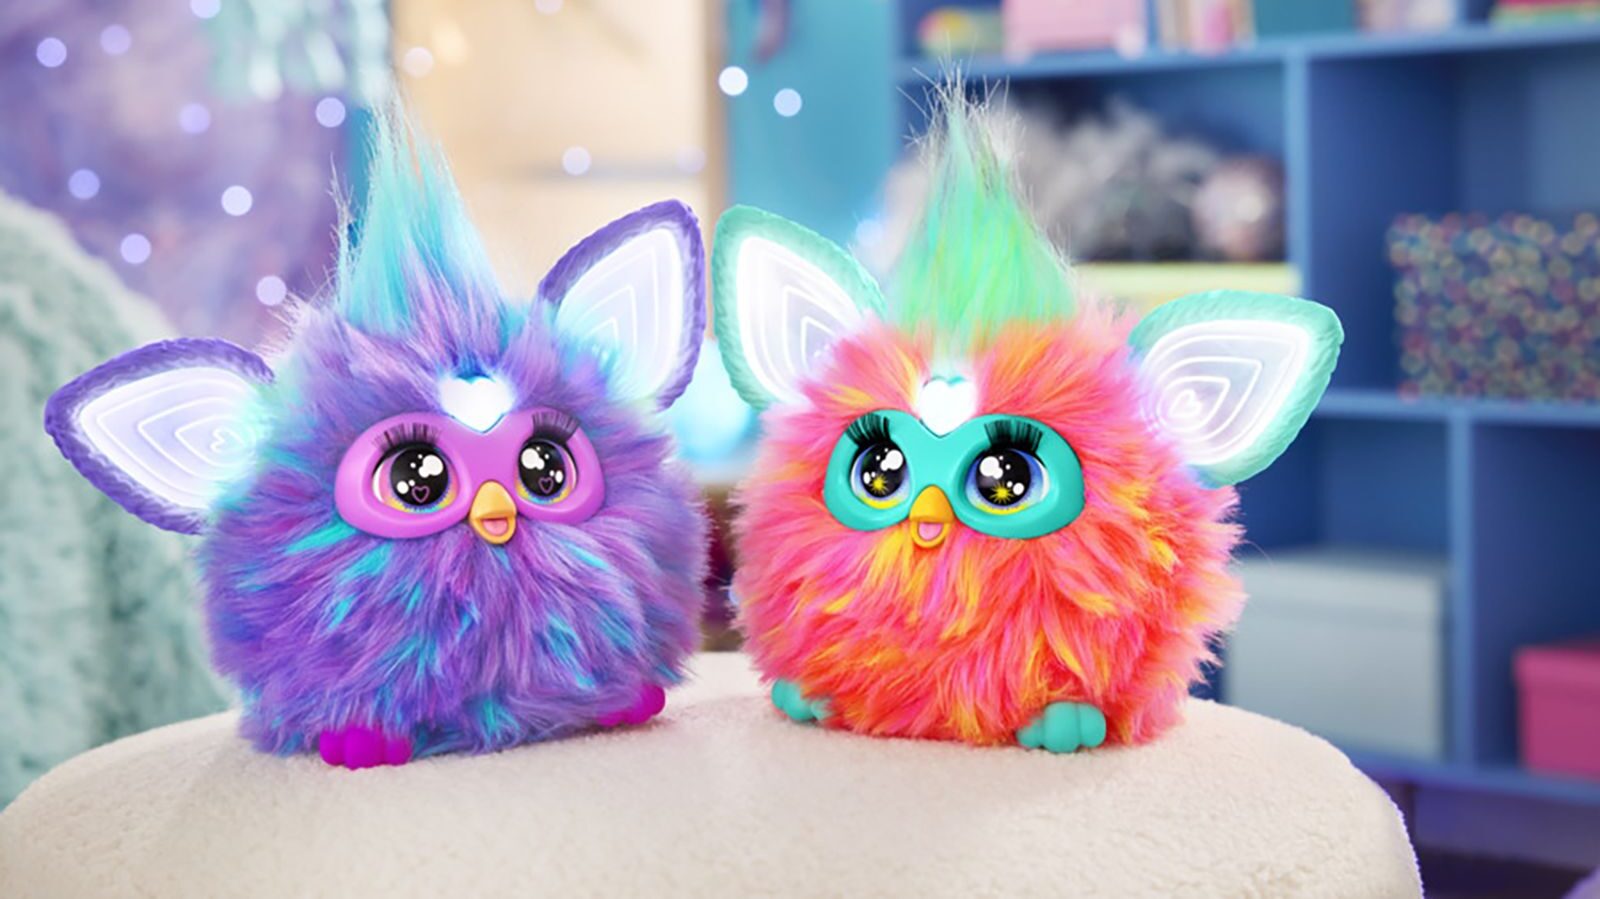 a furby toy pair is pictured, one pink and one purple...